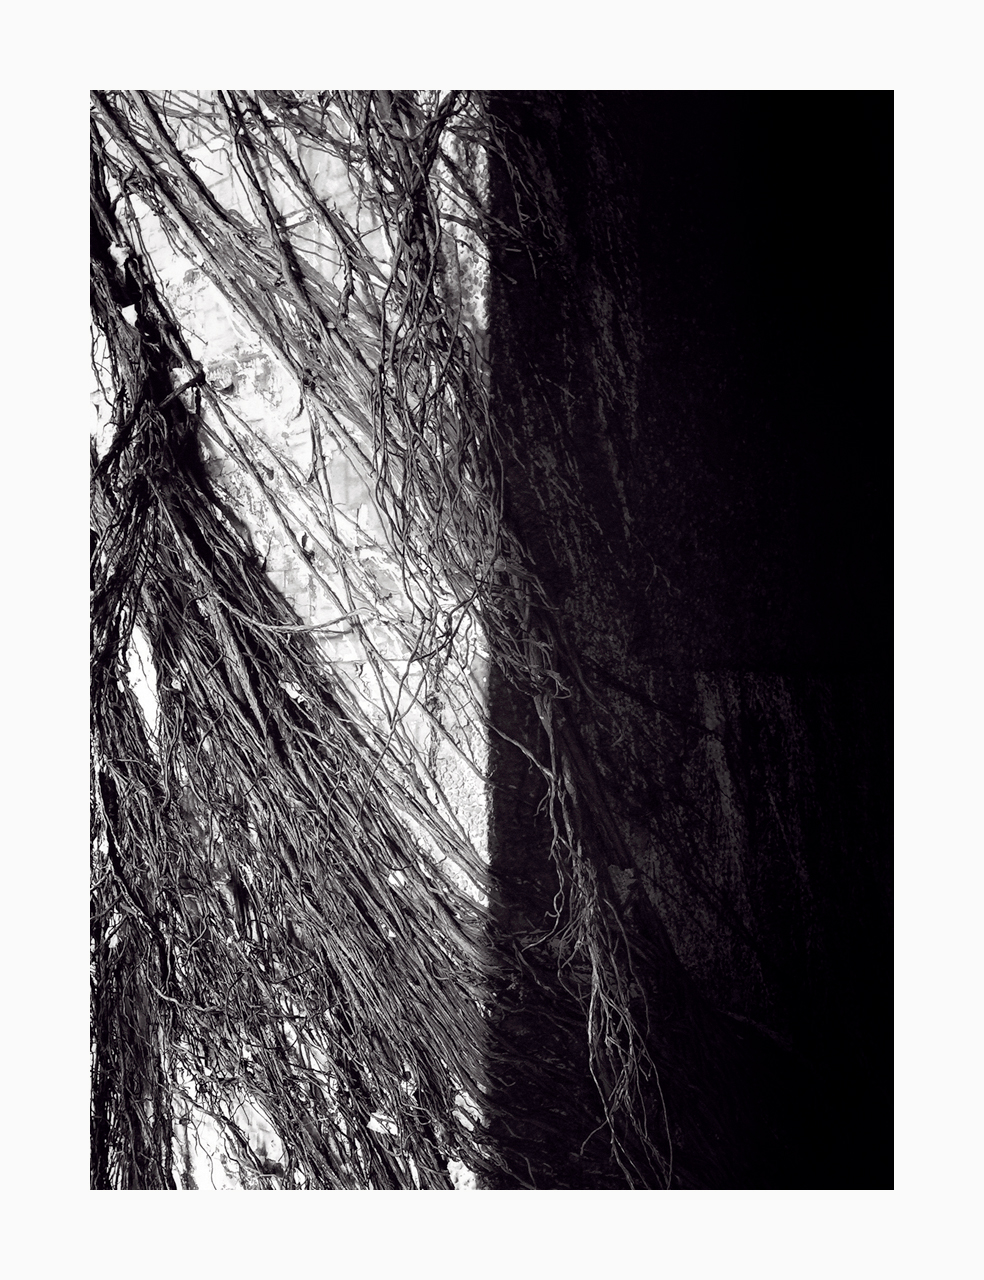 Fine art black and white image of roots covering a pillar